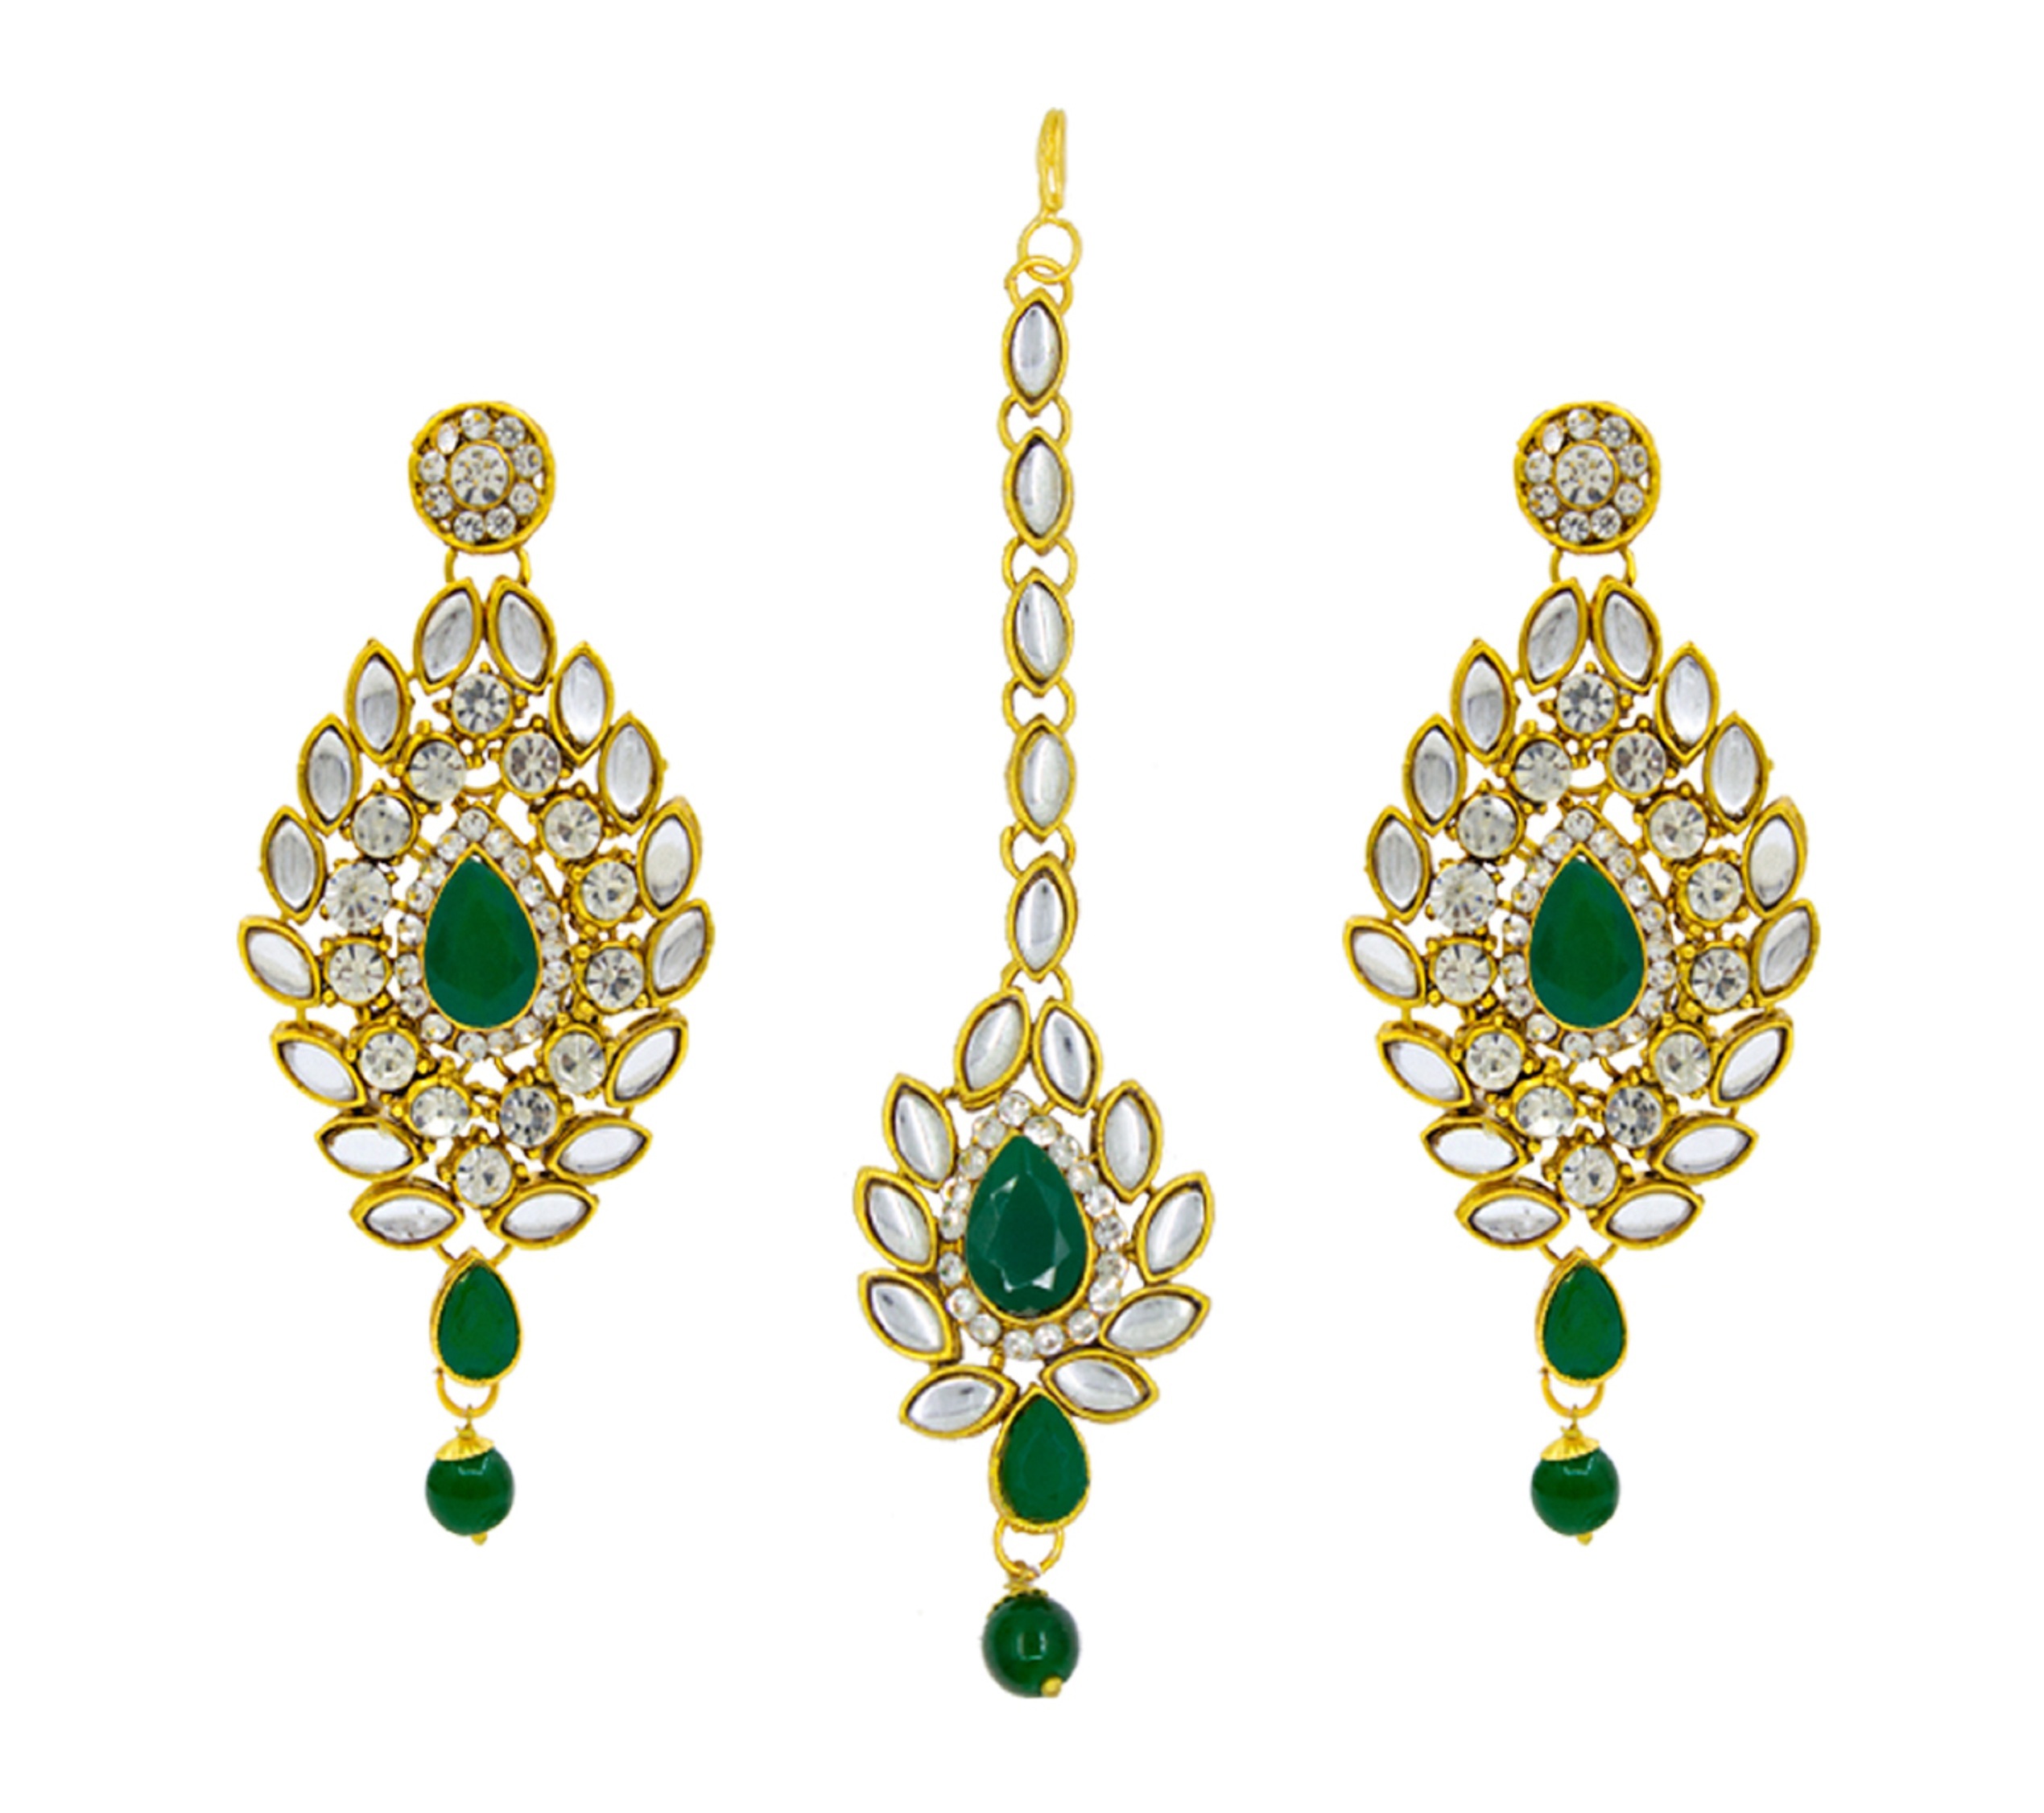 Attractive New Design Gold Plated Necklace Set For Women (Green & White)